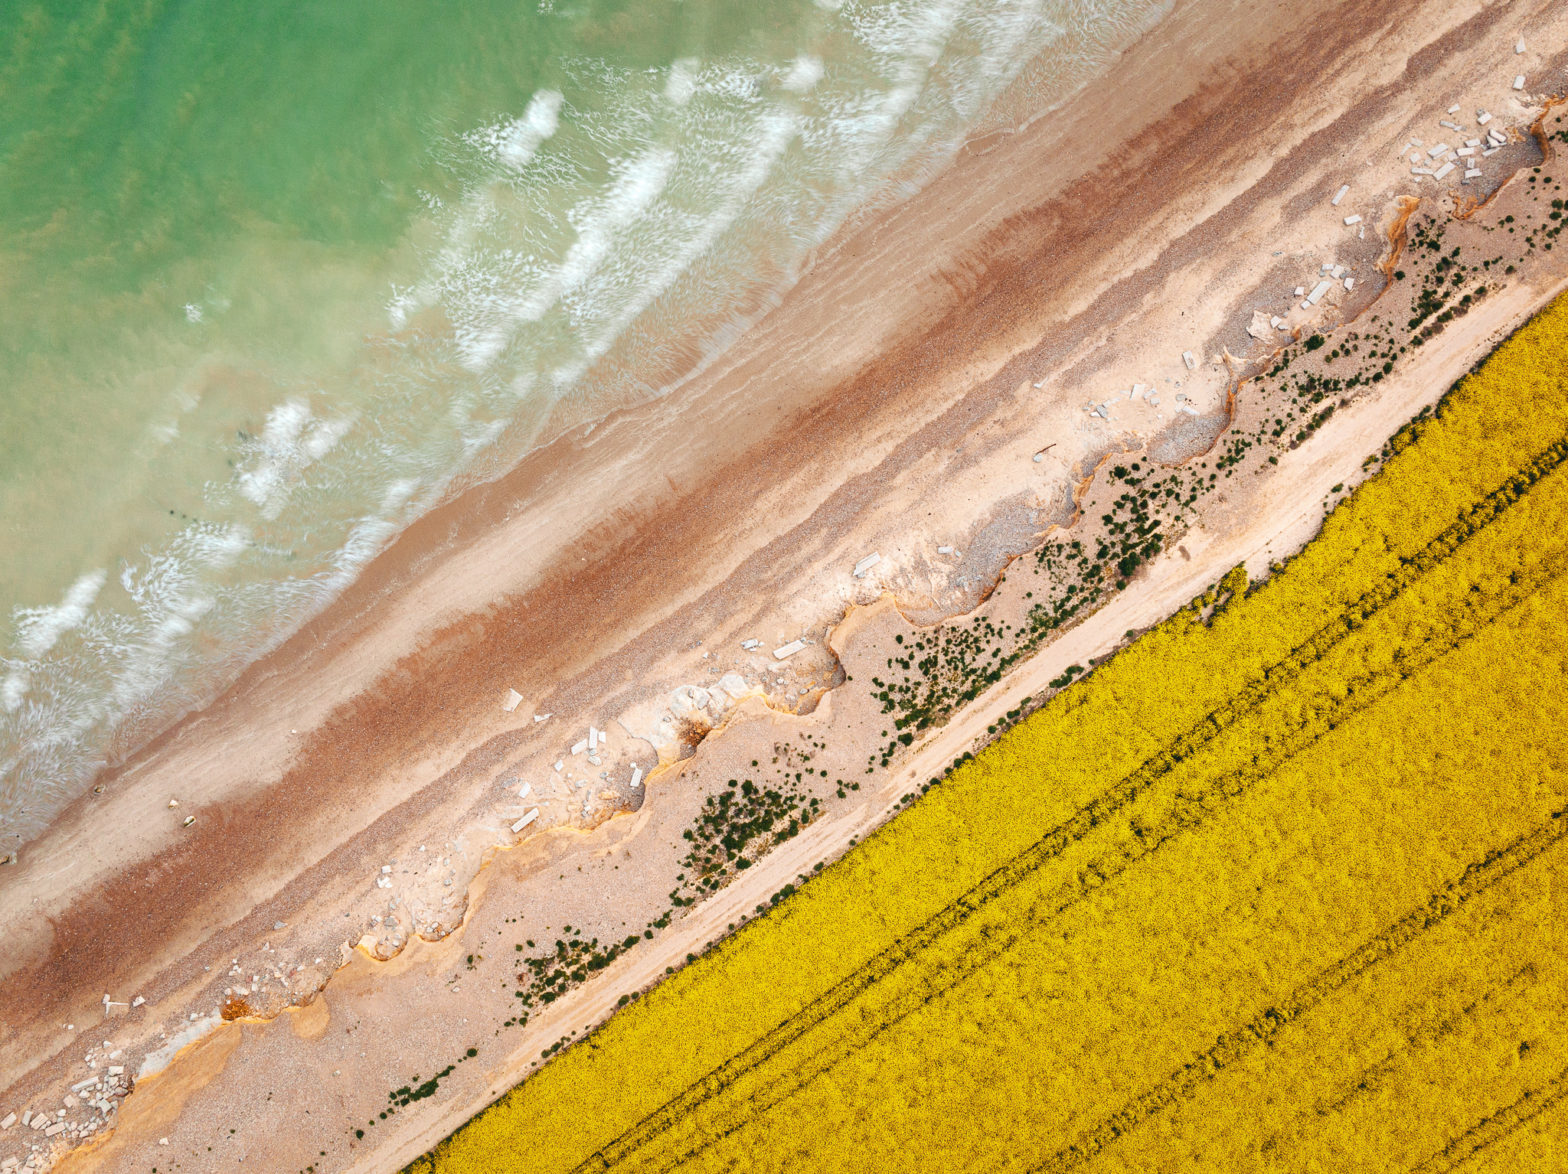 Yellow rapeseed field in full bloom by the beach with waves gentry rolling on the shore